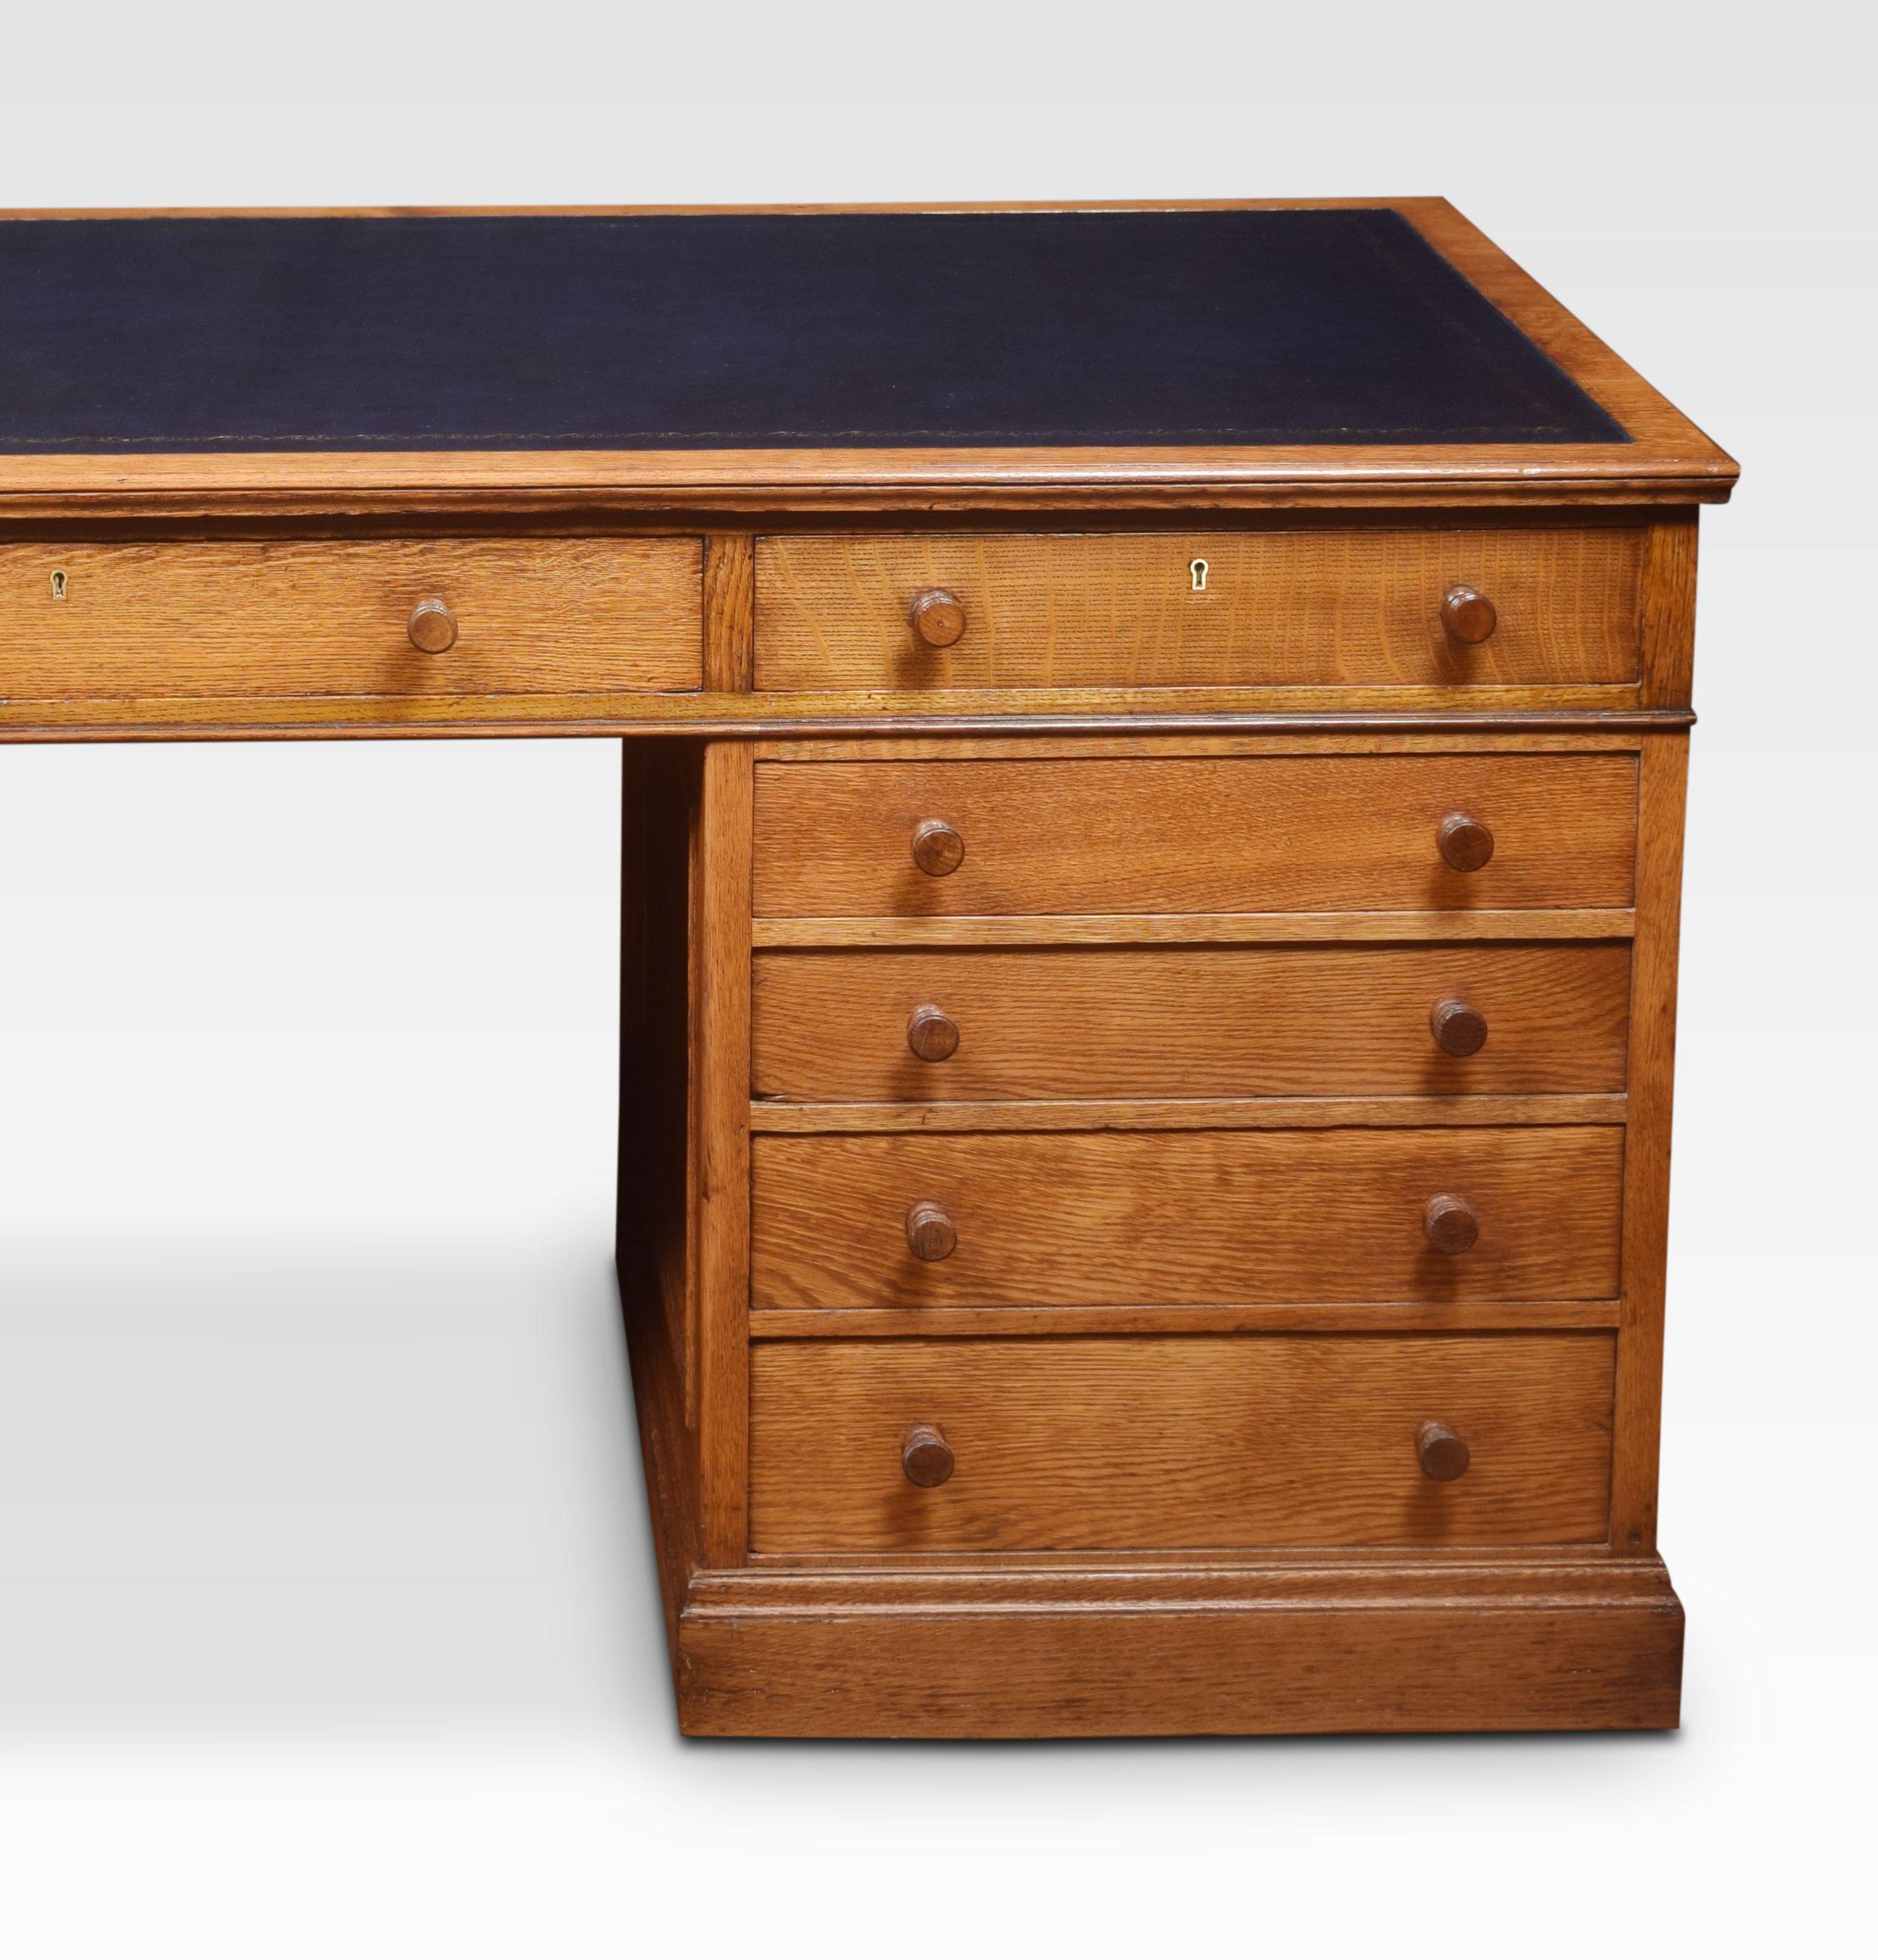 Large oak pedestal desk the rectangular top with inset leather having tooled border enclosed by a molded edge over an arrangement of three freeze drawers. Above two large pedestals, one side with two banks of four drawers the opposing side fitted